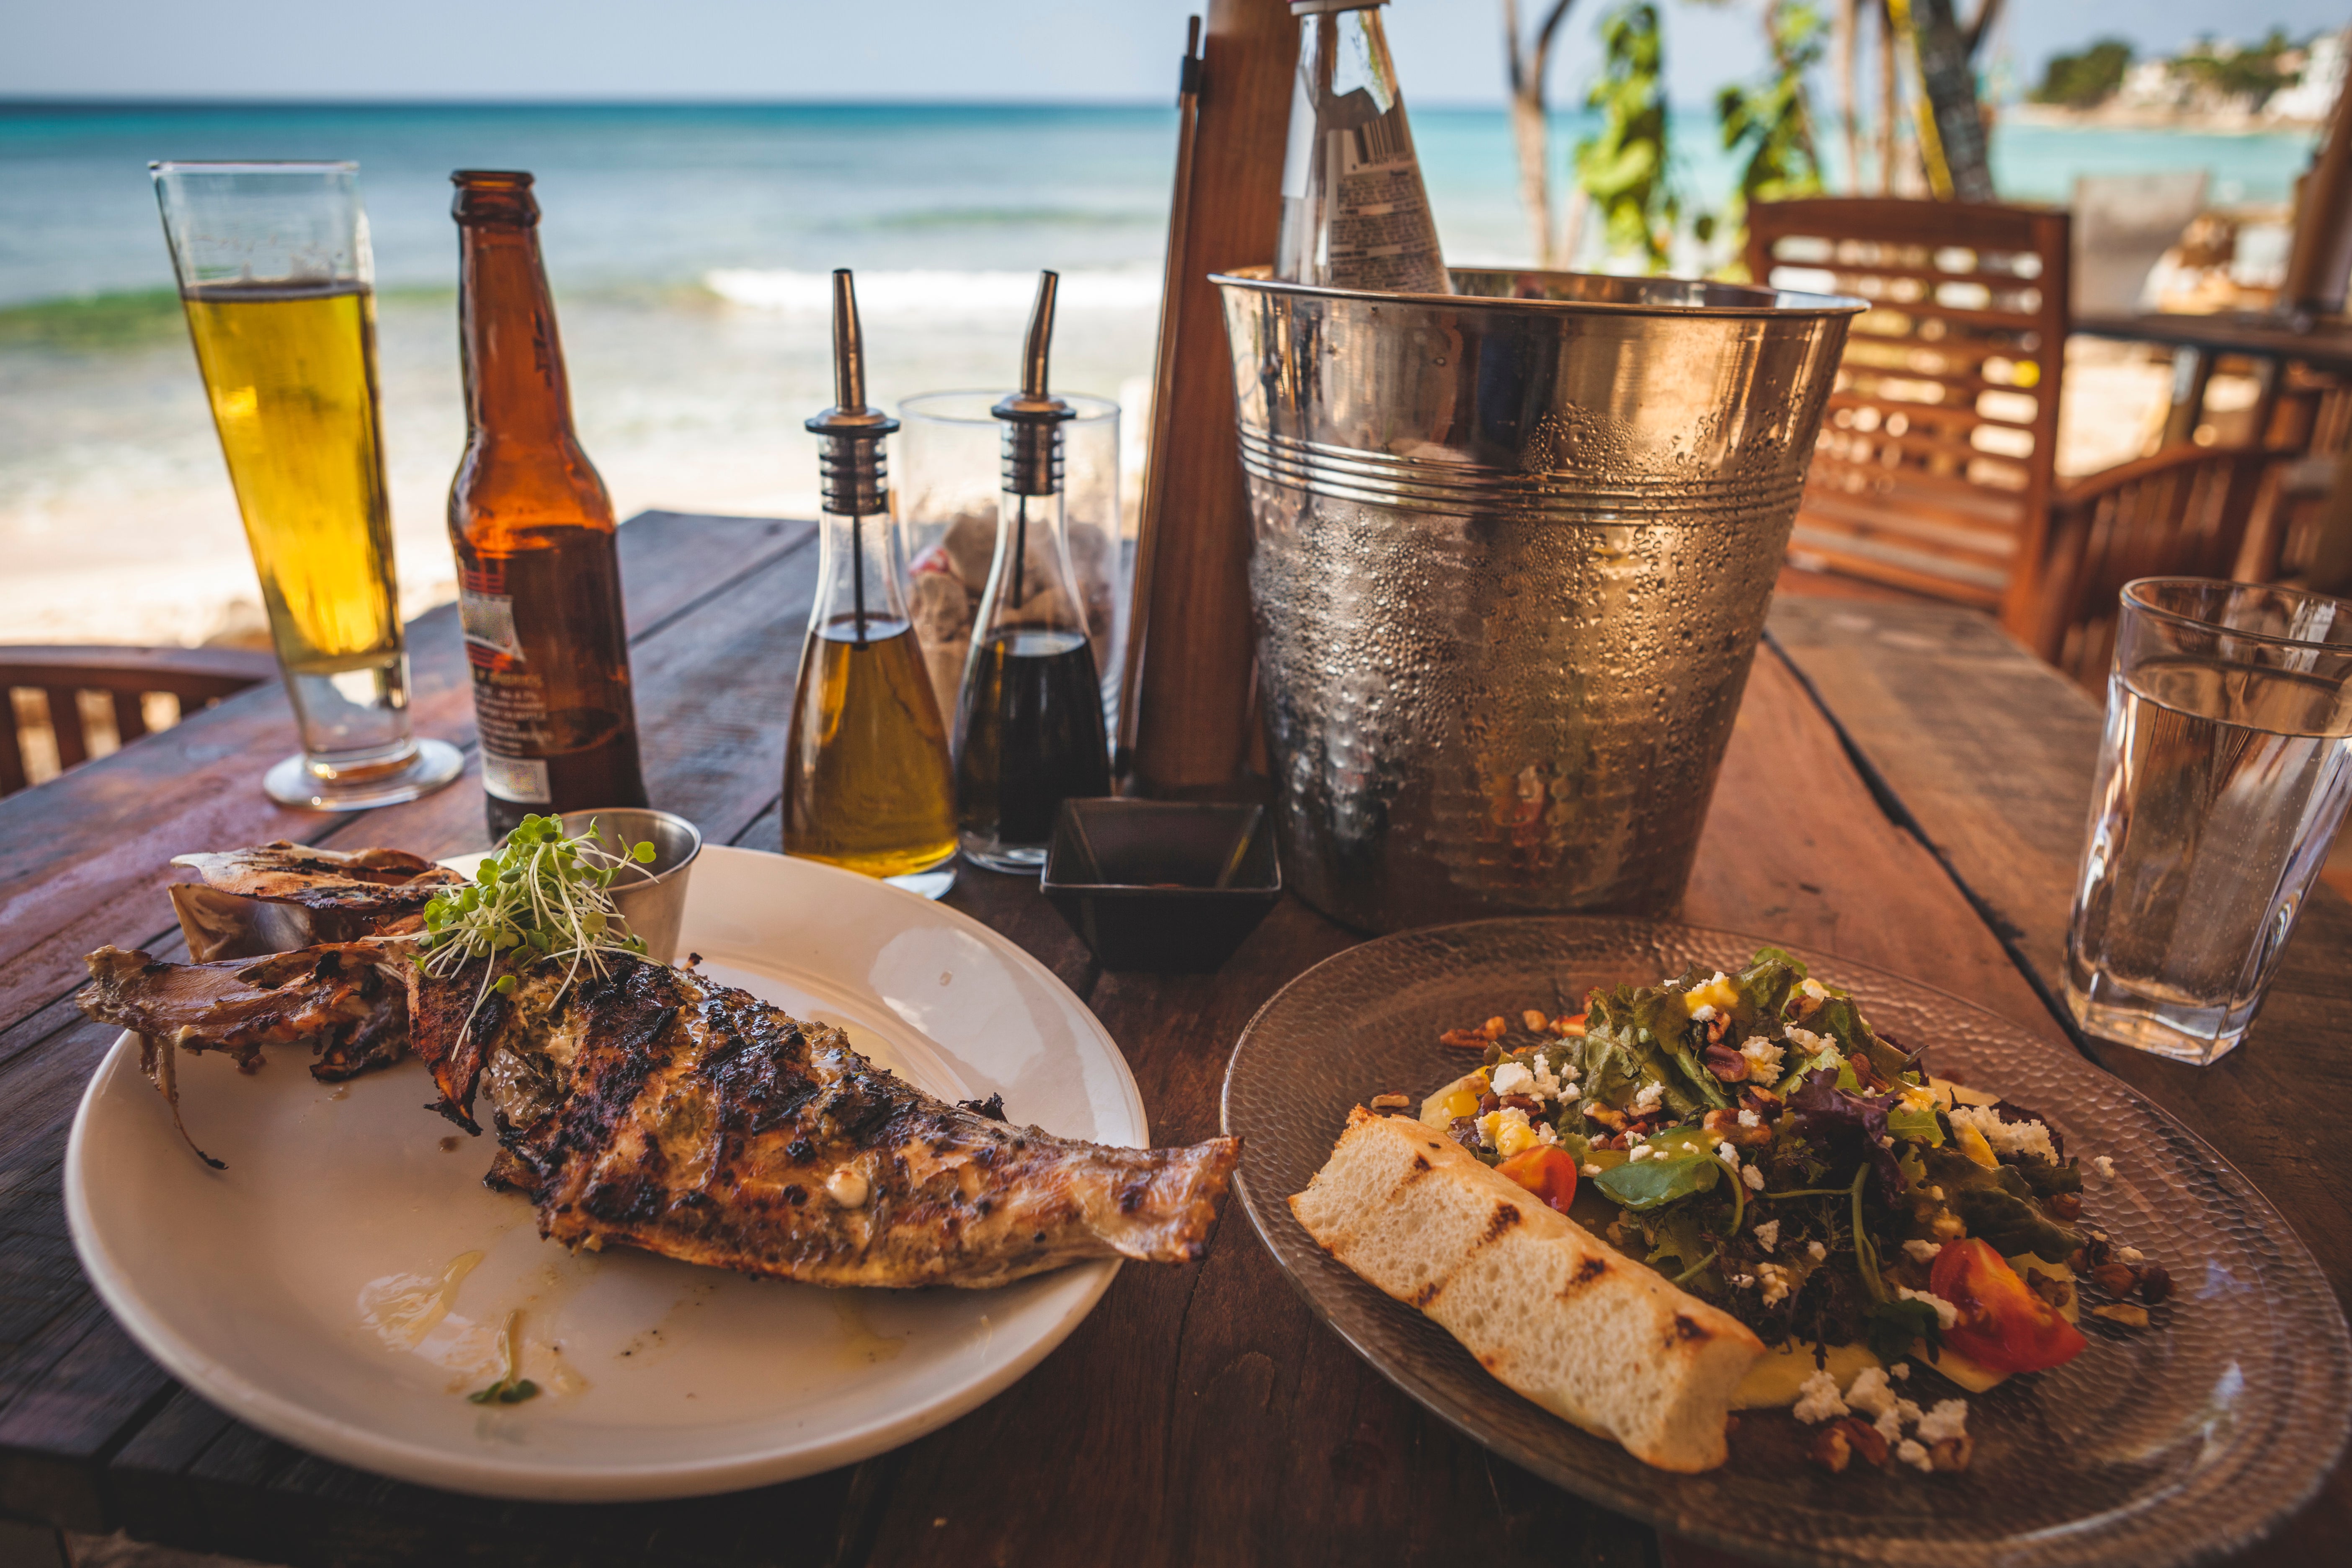 Tuck into some delicious bajan cuisine at one of the eateries loved by locals